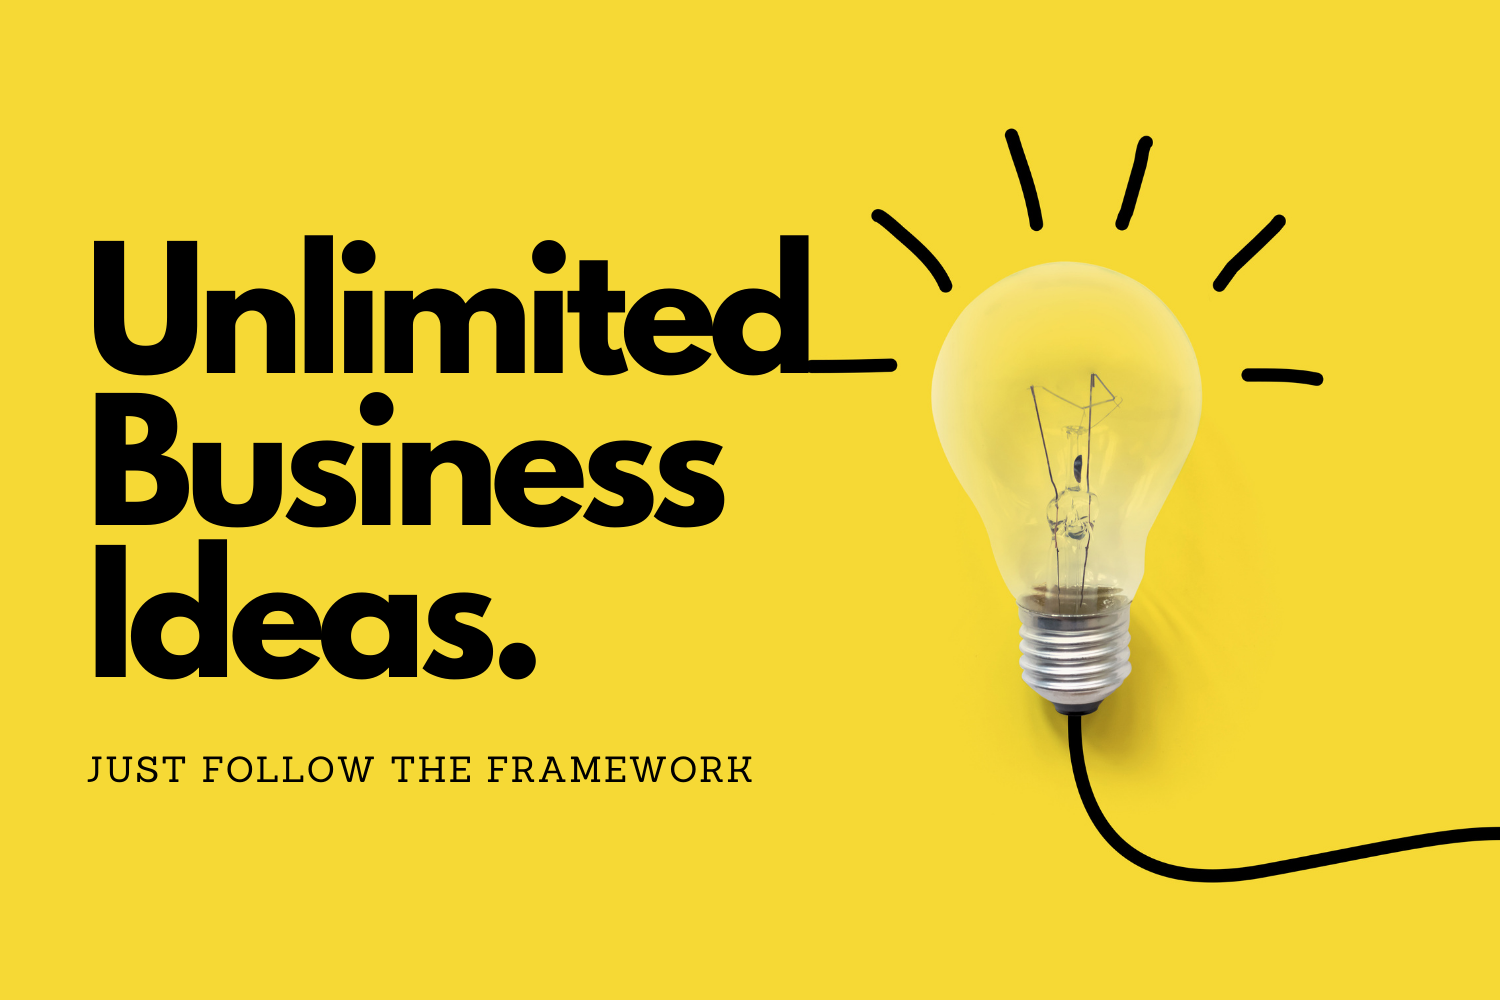 How To Get Business Ideas? Generate Unlimited Business Ideas!